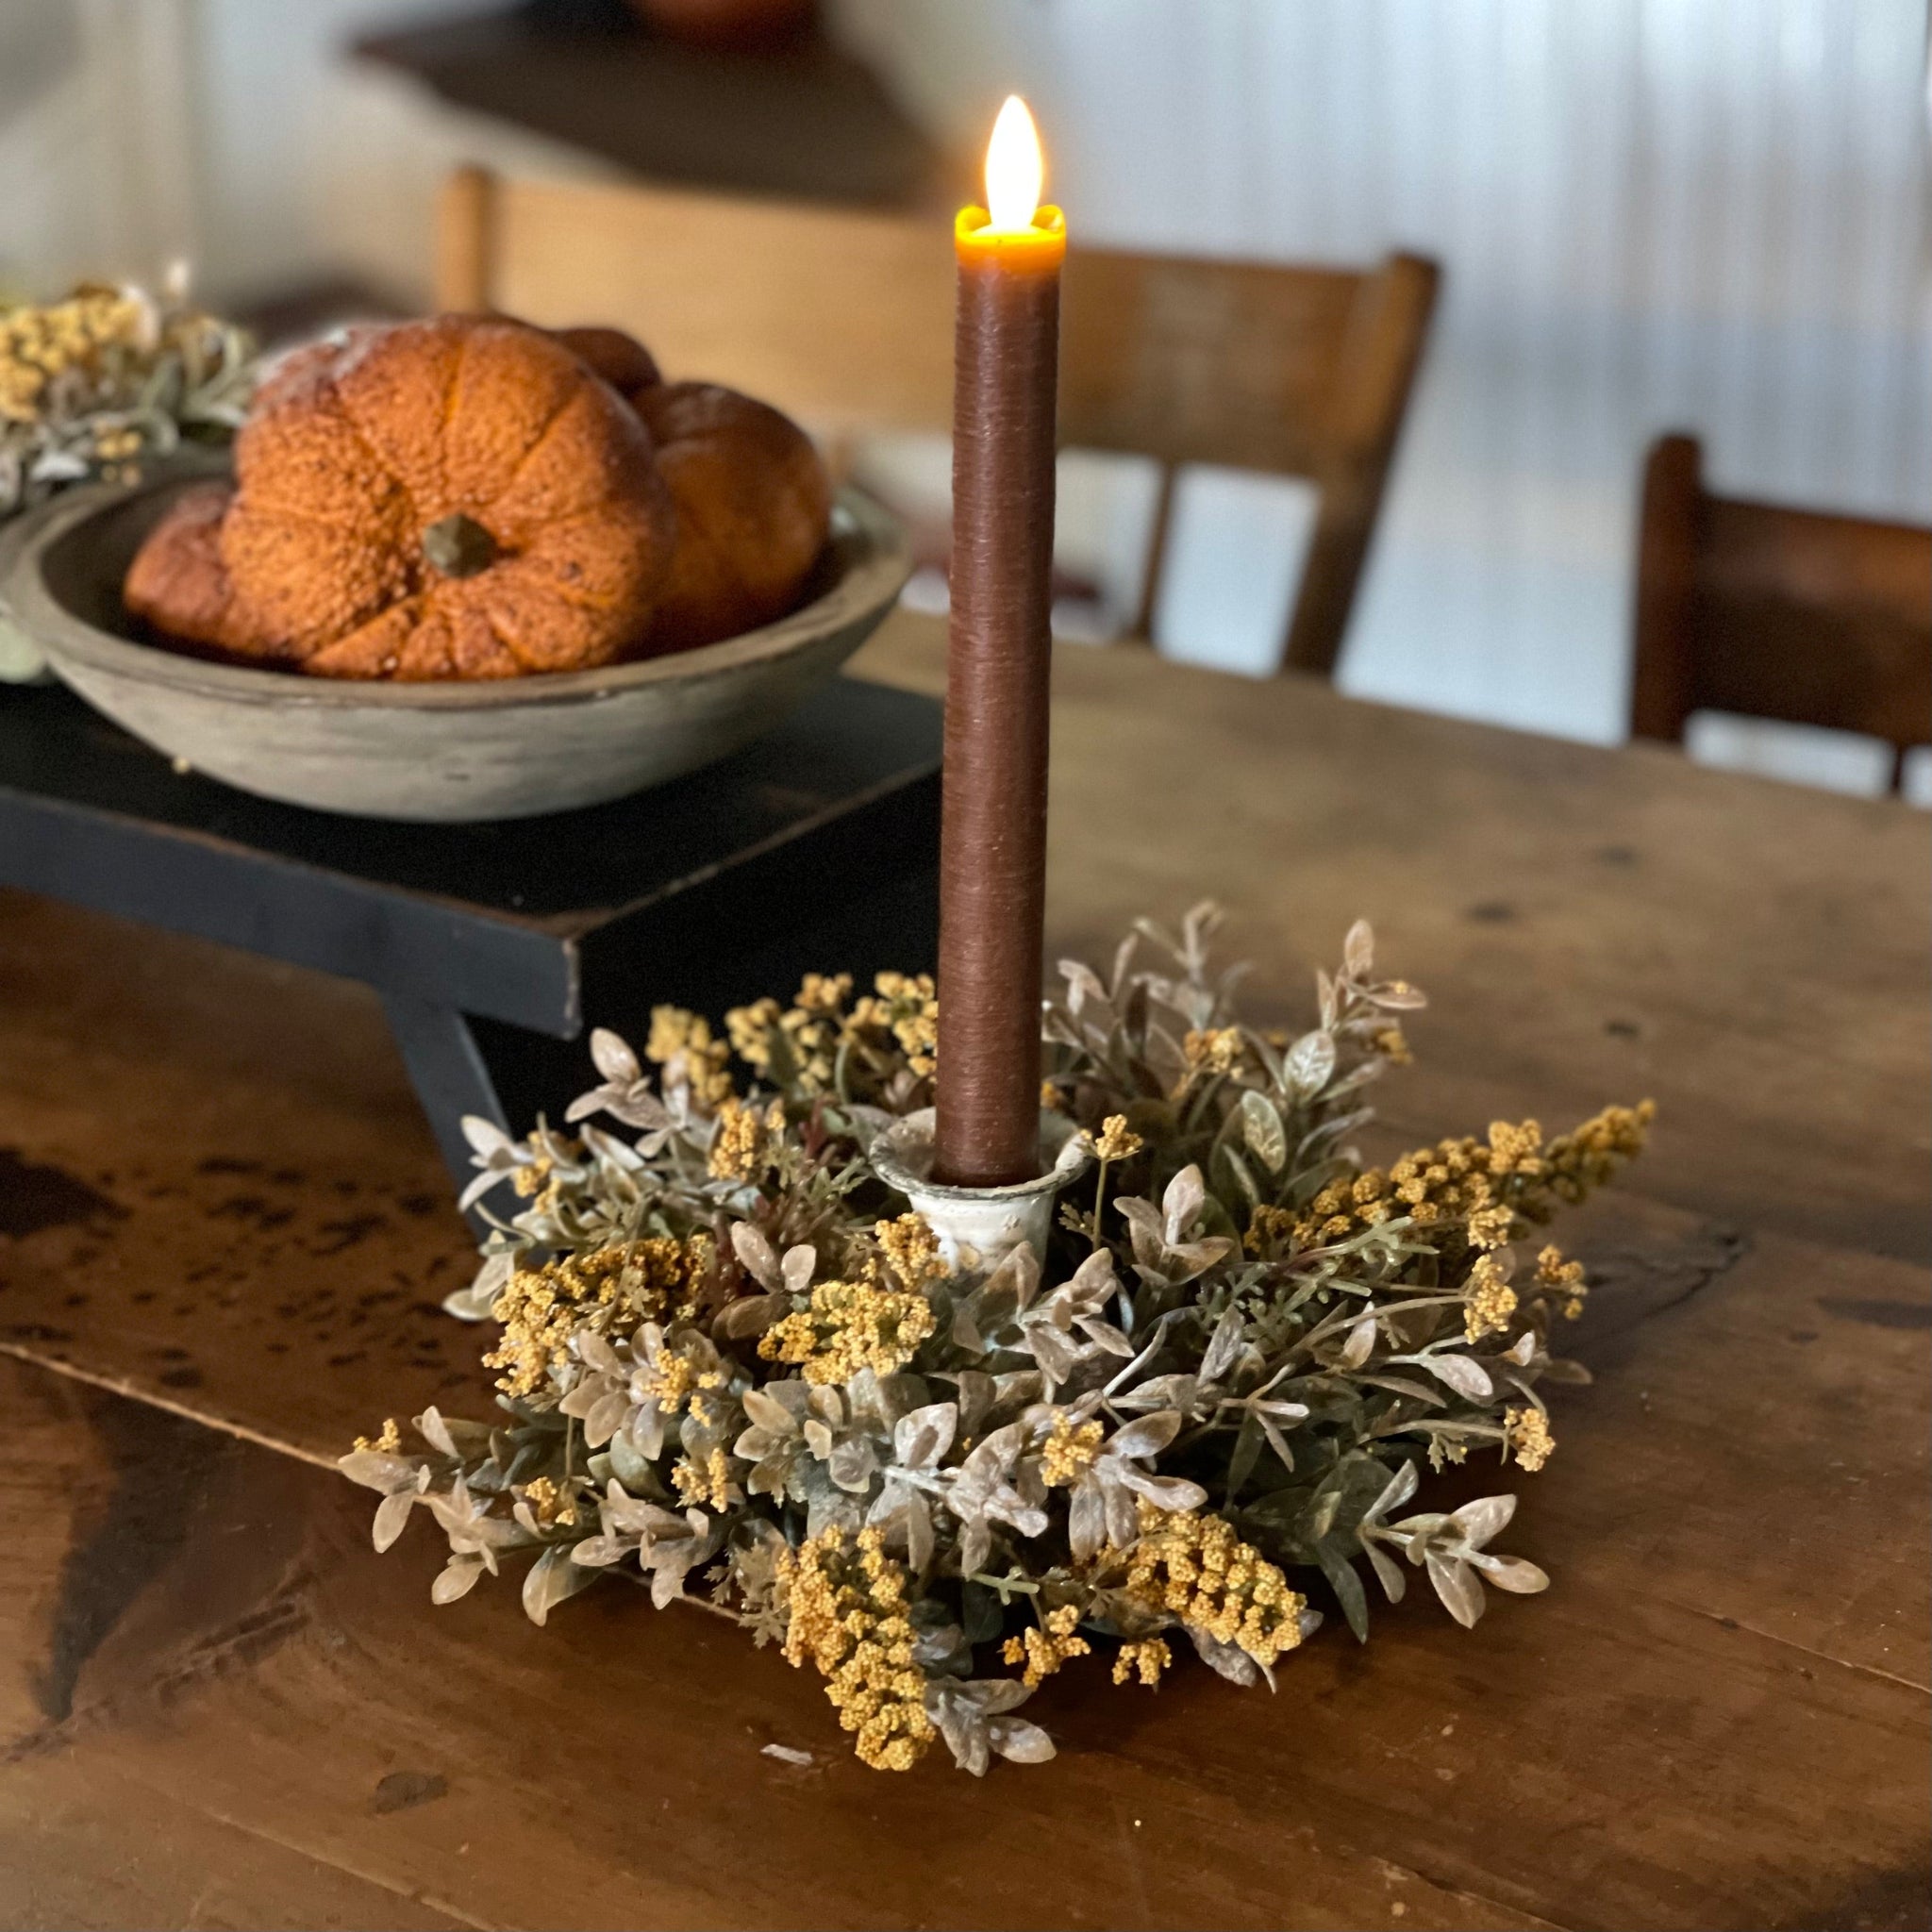 Mustard Candle Ring Country Fall Decor, Fall Decor, Fall Decorating, Fall Decorating Ideas, Farmhouse Decor, Farmhouse Fall Decor, Mustard Candle Ring, New, Primitive Fall Decor, Rustic Fall Decor, The best fall decor, Vintage fall decor 